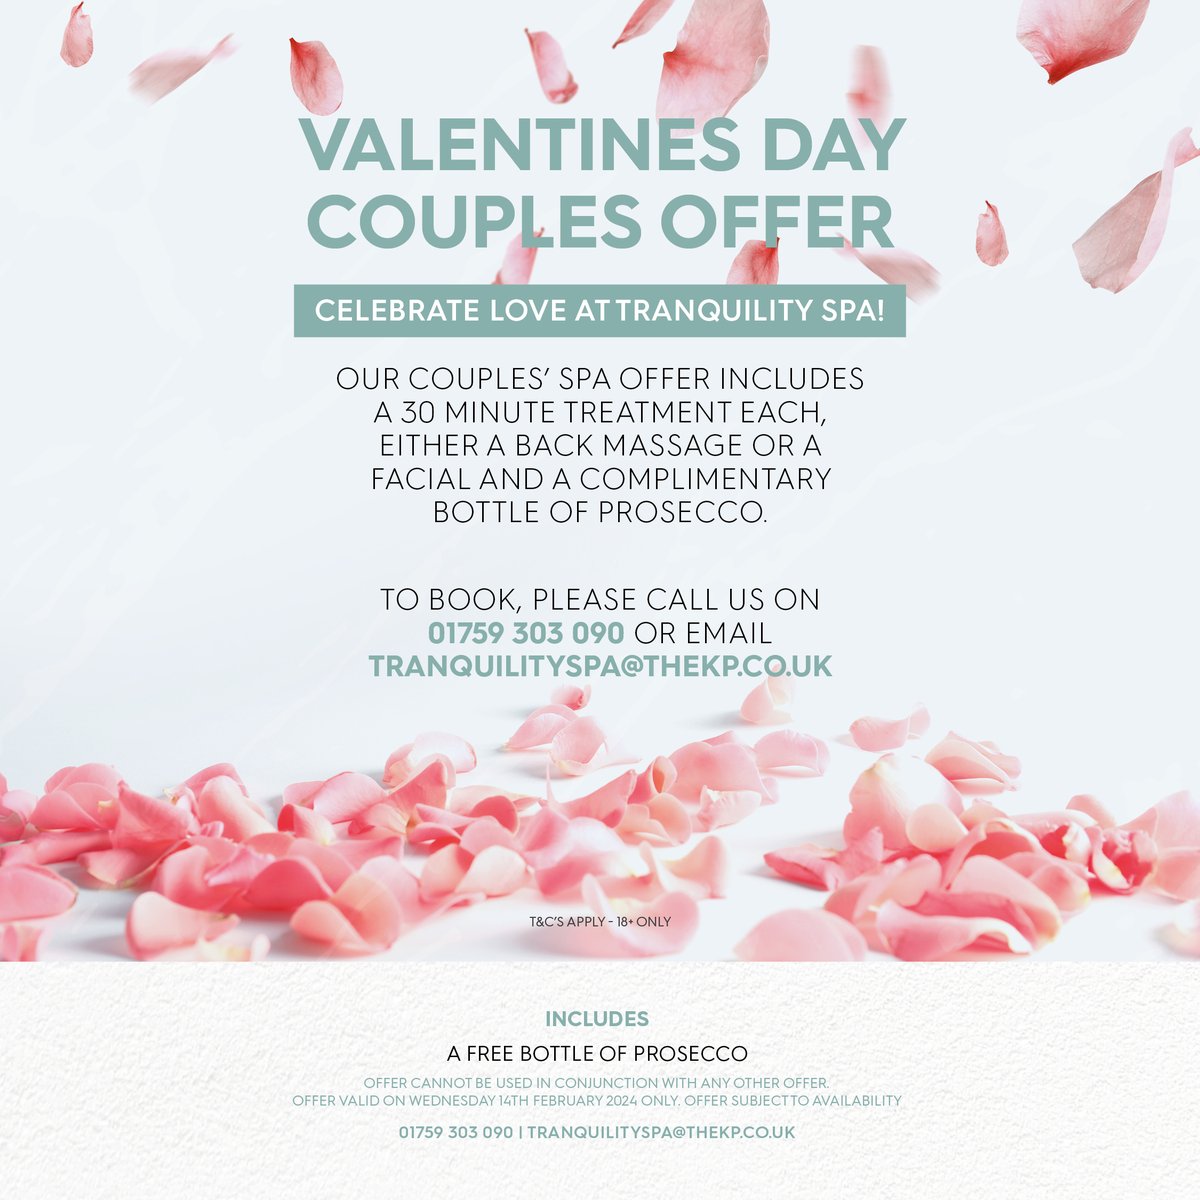 Valentines Day Couples Offer in the Tranquility Spa here at Kilnwick Percy Resort & Golf Club ✨